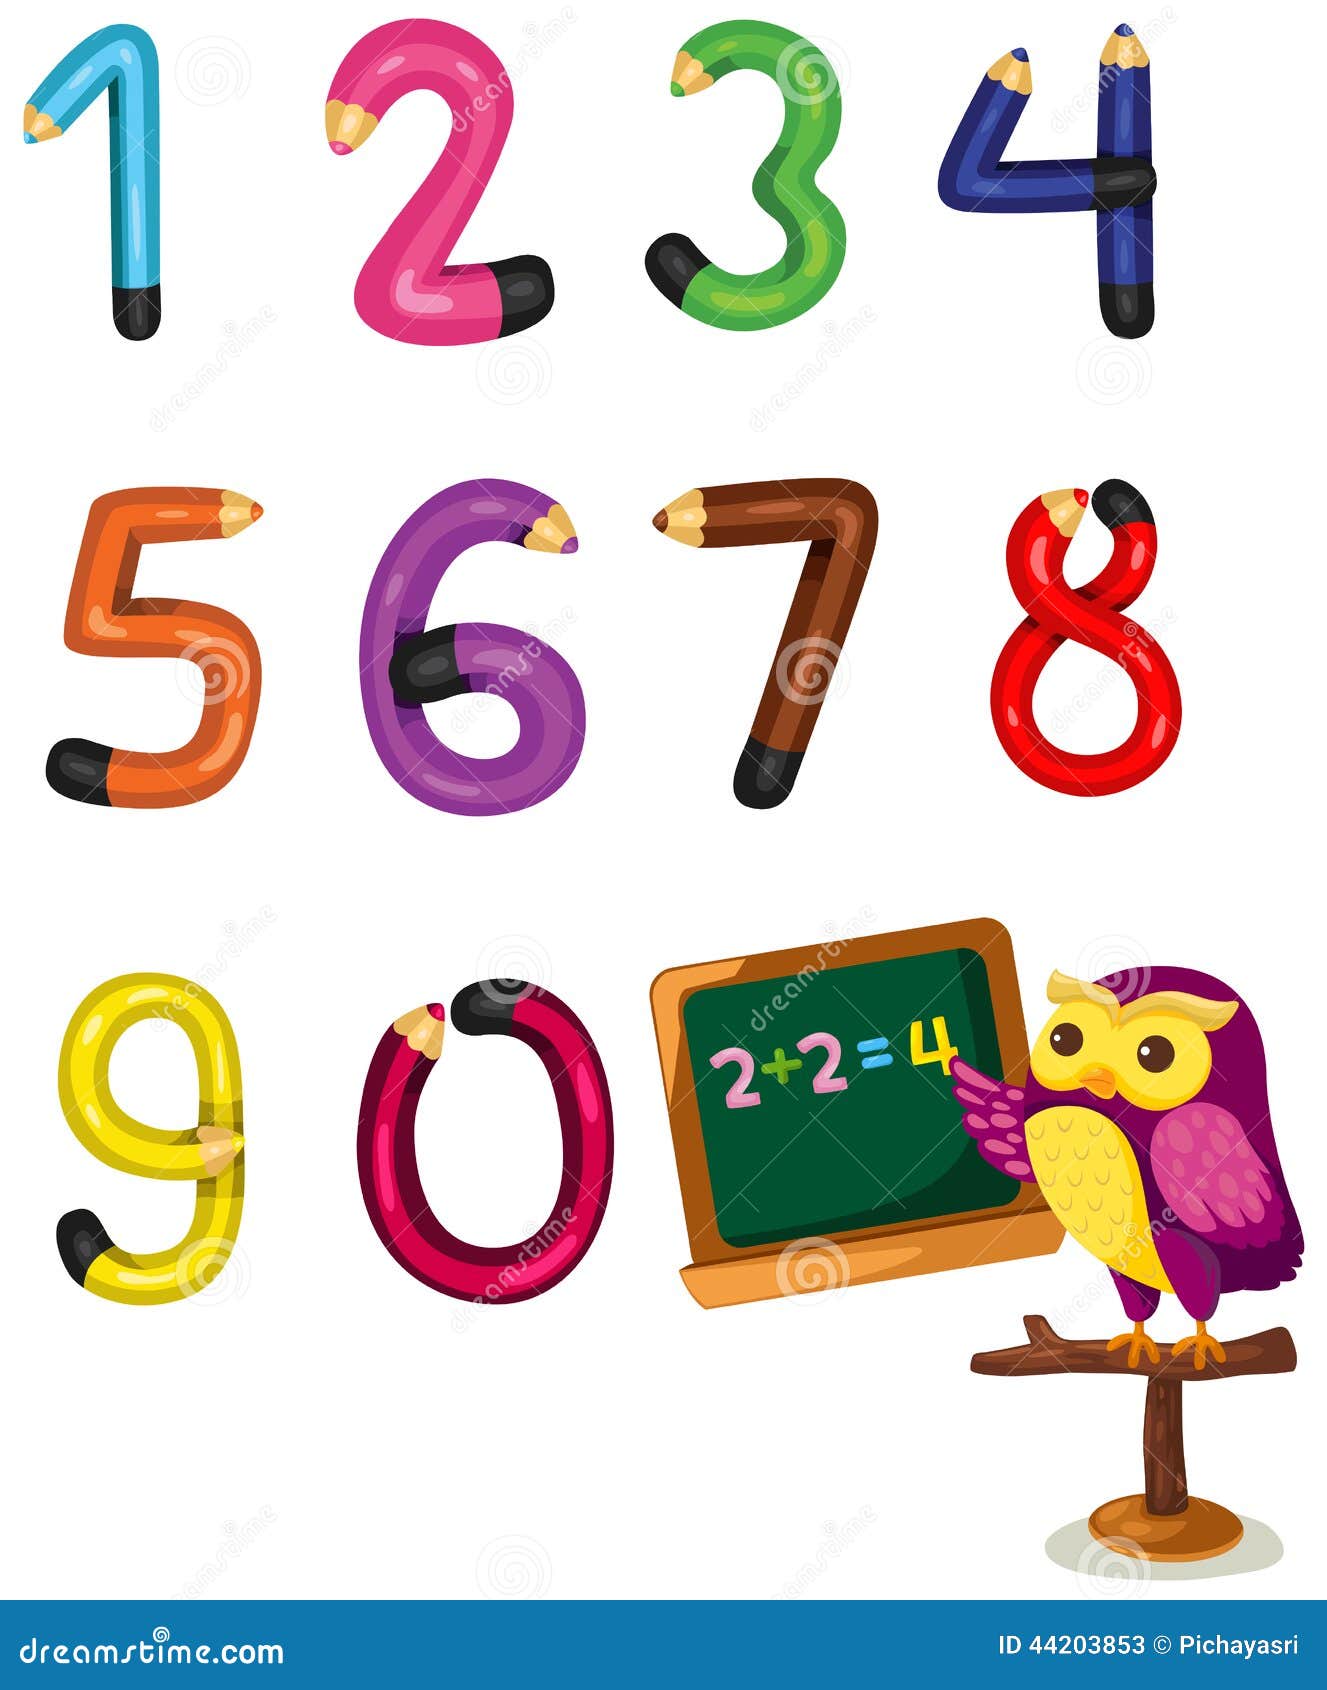 numbers clipart for teachers - photo #3